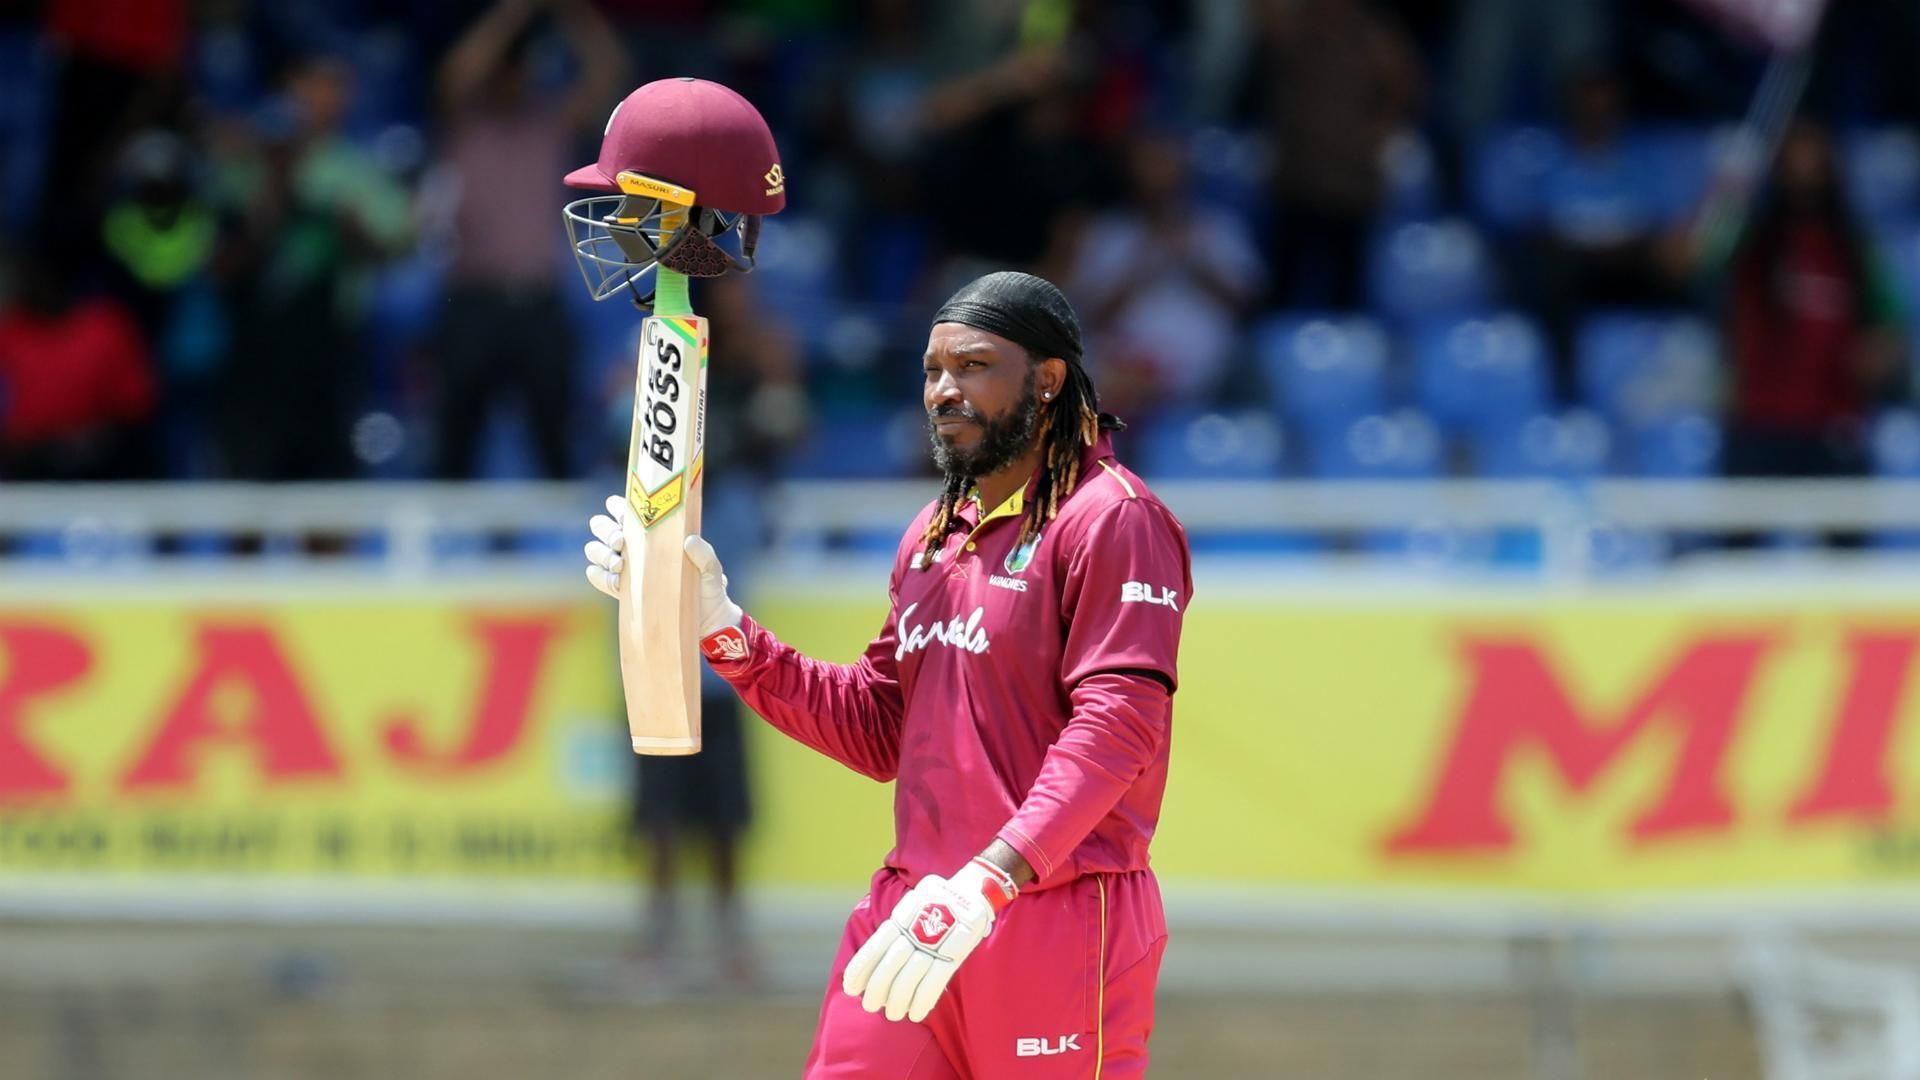 Chris Gayle reached the milestone of 10 000 T20 runs in 2012